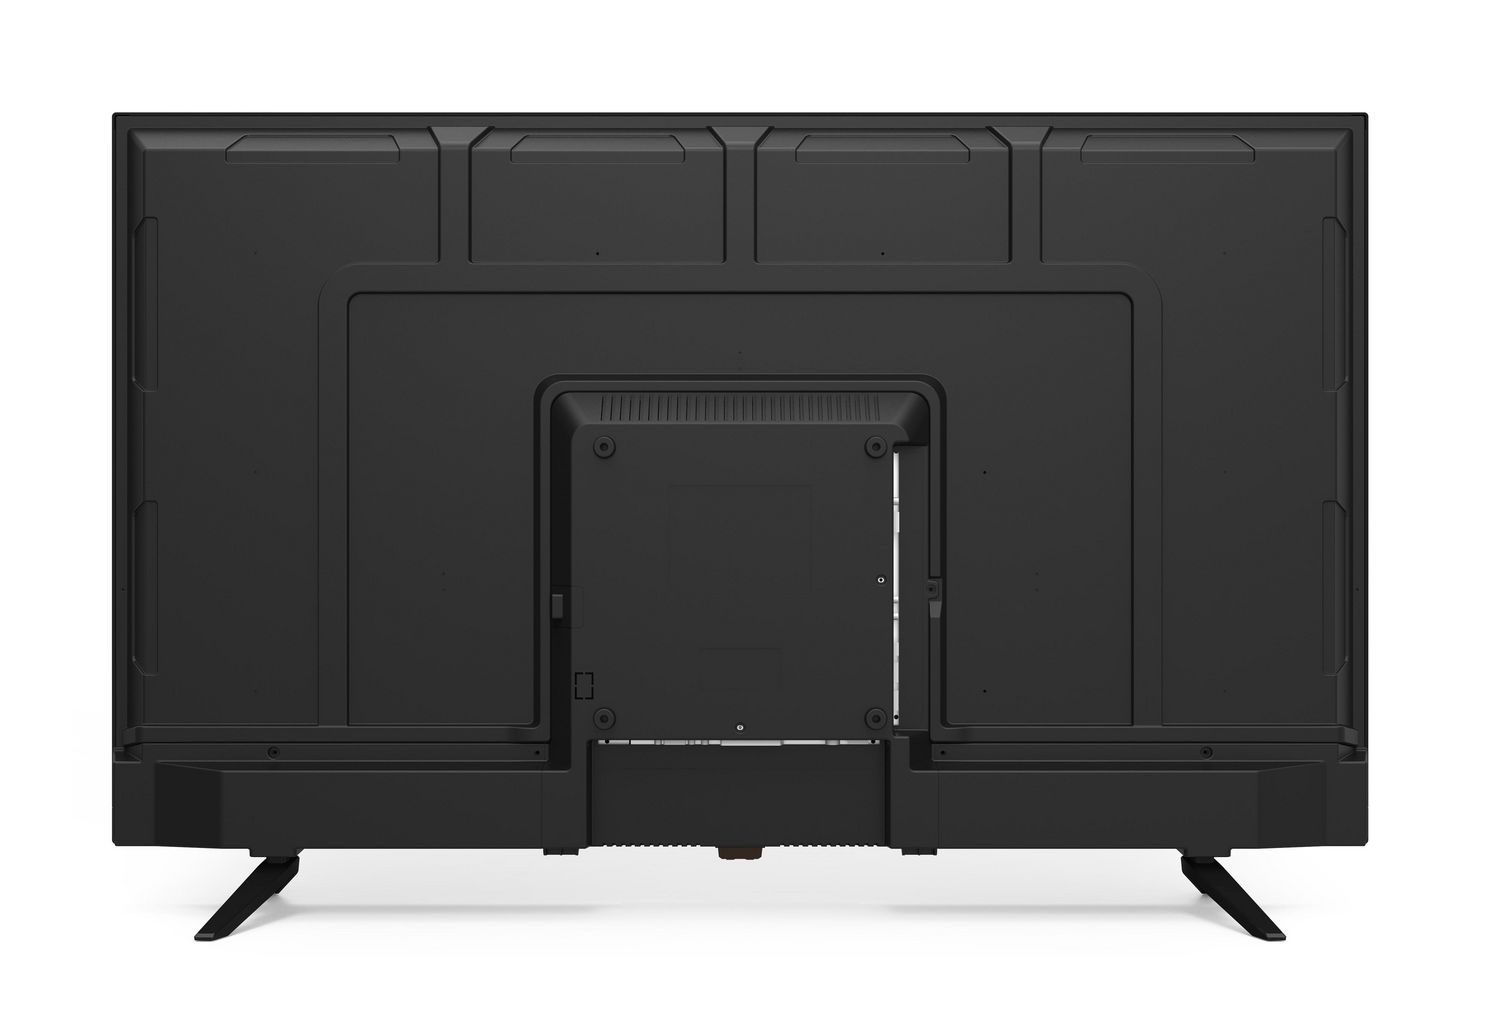 RCA 58-INCH 4K UHD TV with HDMI Ports